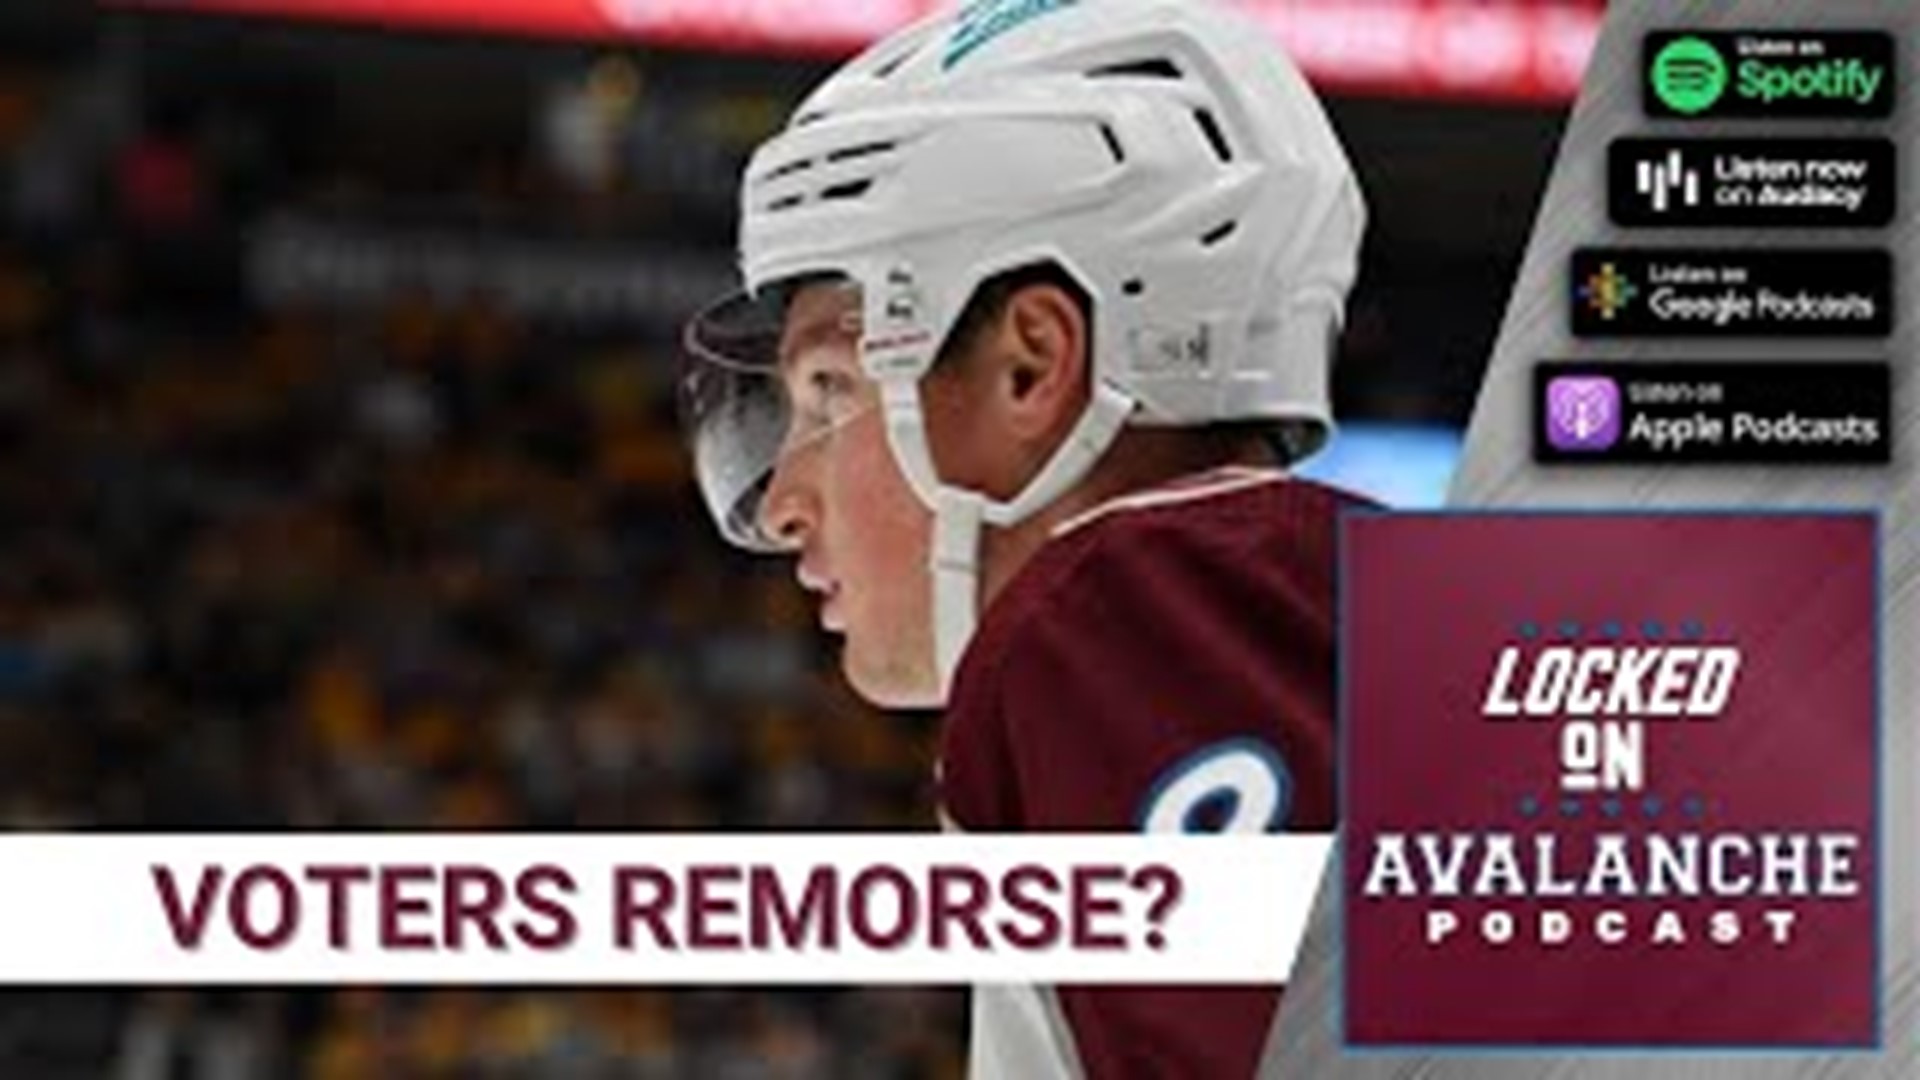 The votes must be in prior to the playoffs starting and while Cale Makar is a finalist for the Norris Trophy, the vibe is that voters are favoring Roman Josi.